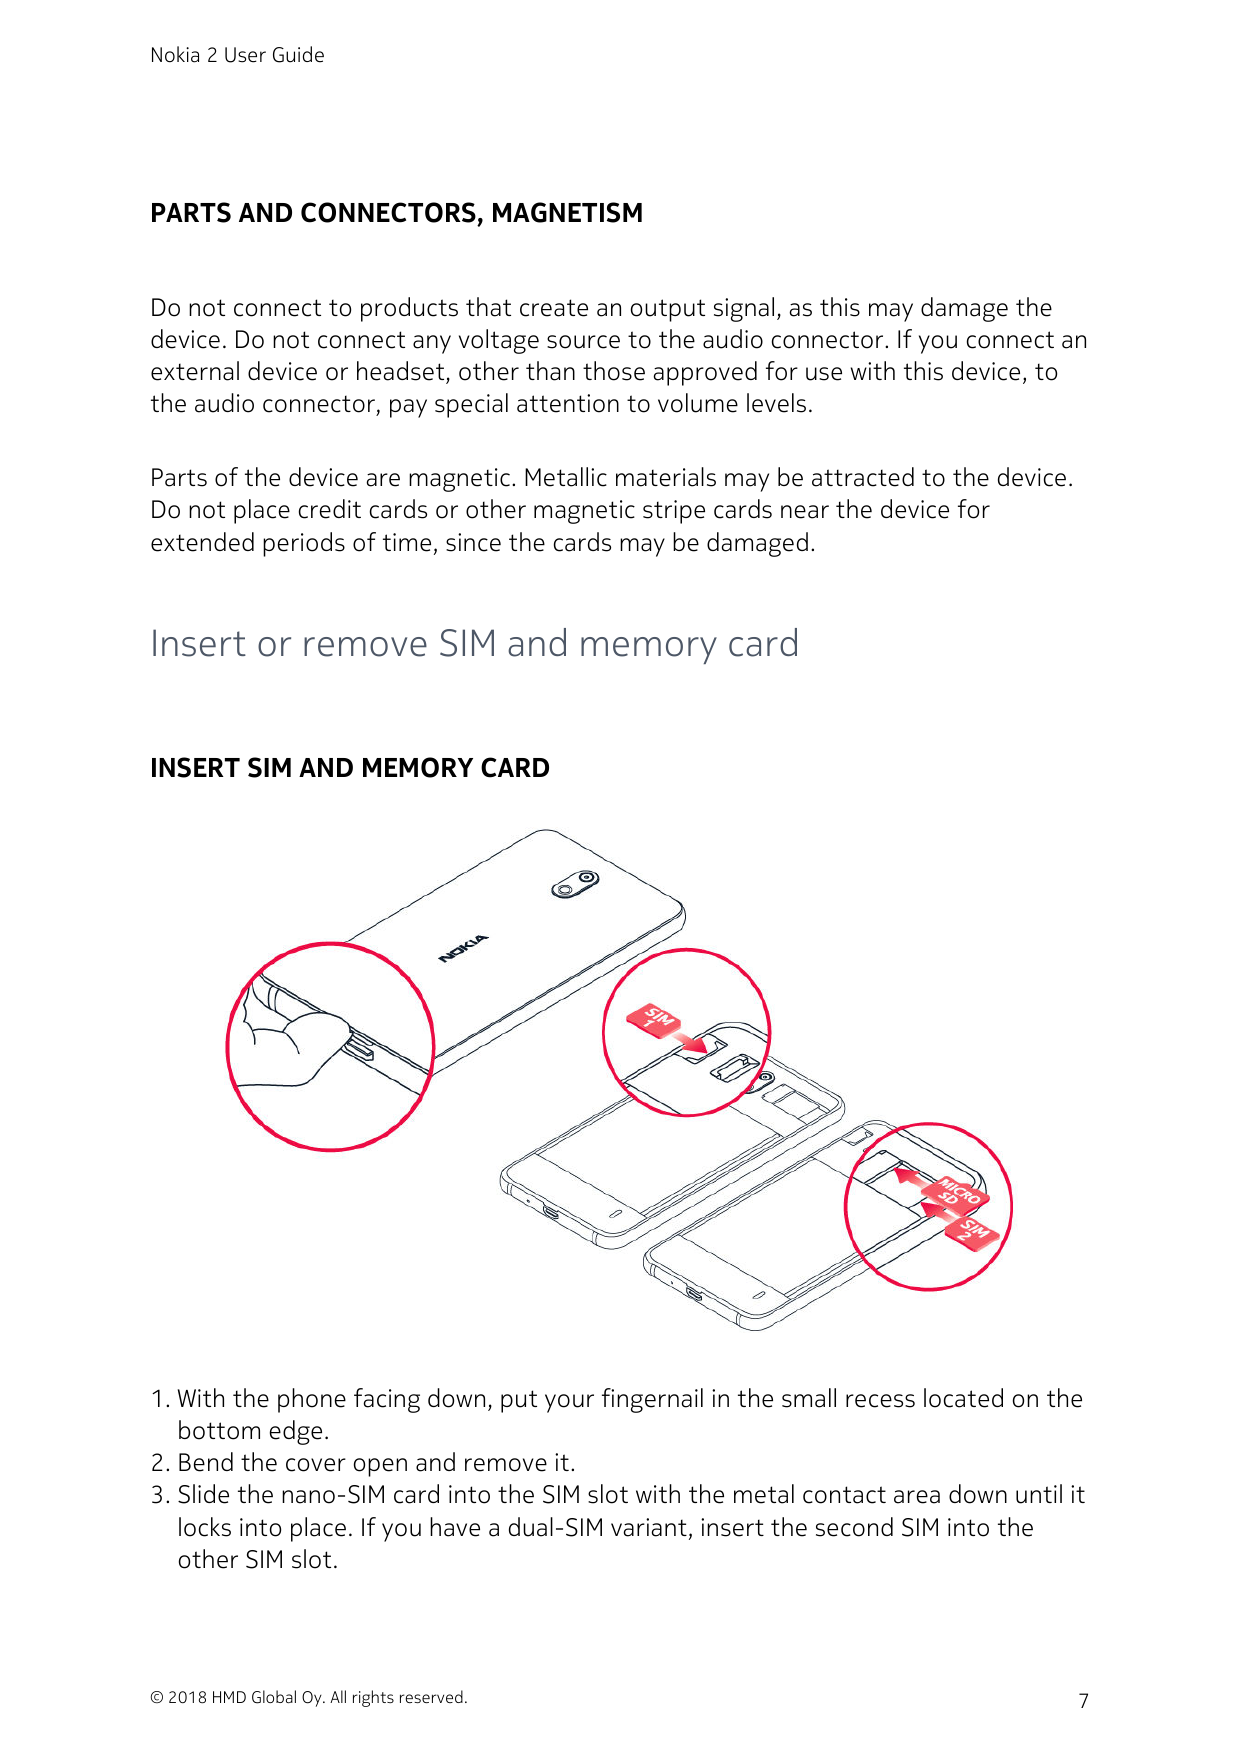 Nokia 2 User GuidePARTS AND CONNECTORS, MAGNETISMDo not connect to products that create an output signal, as this may damage the